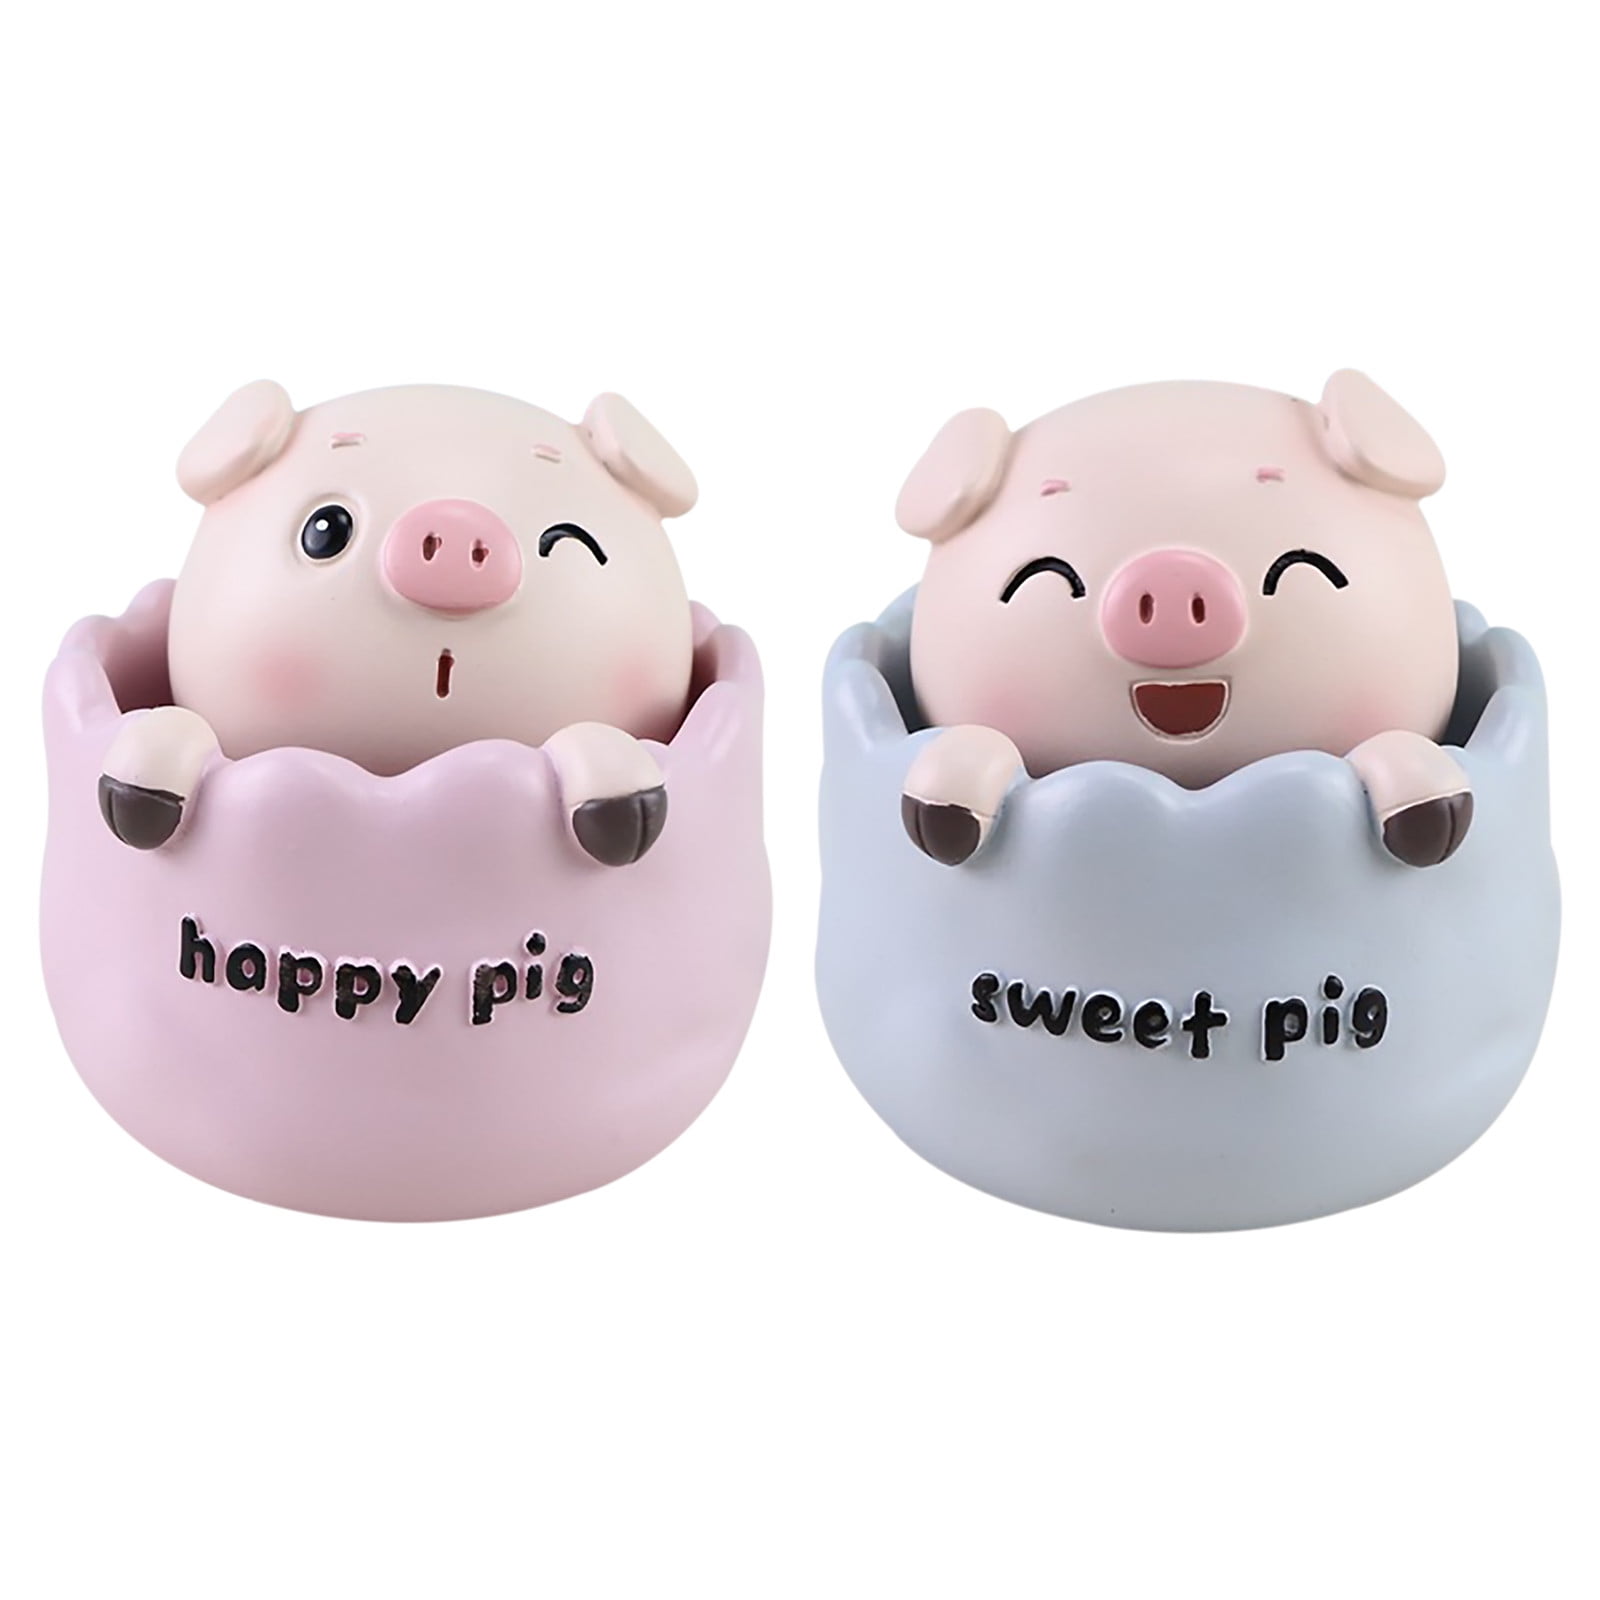 Creative Resin Shaking Head Happy Pig for Home Decor Kids Birthday Gift 